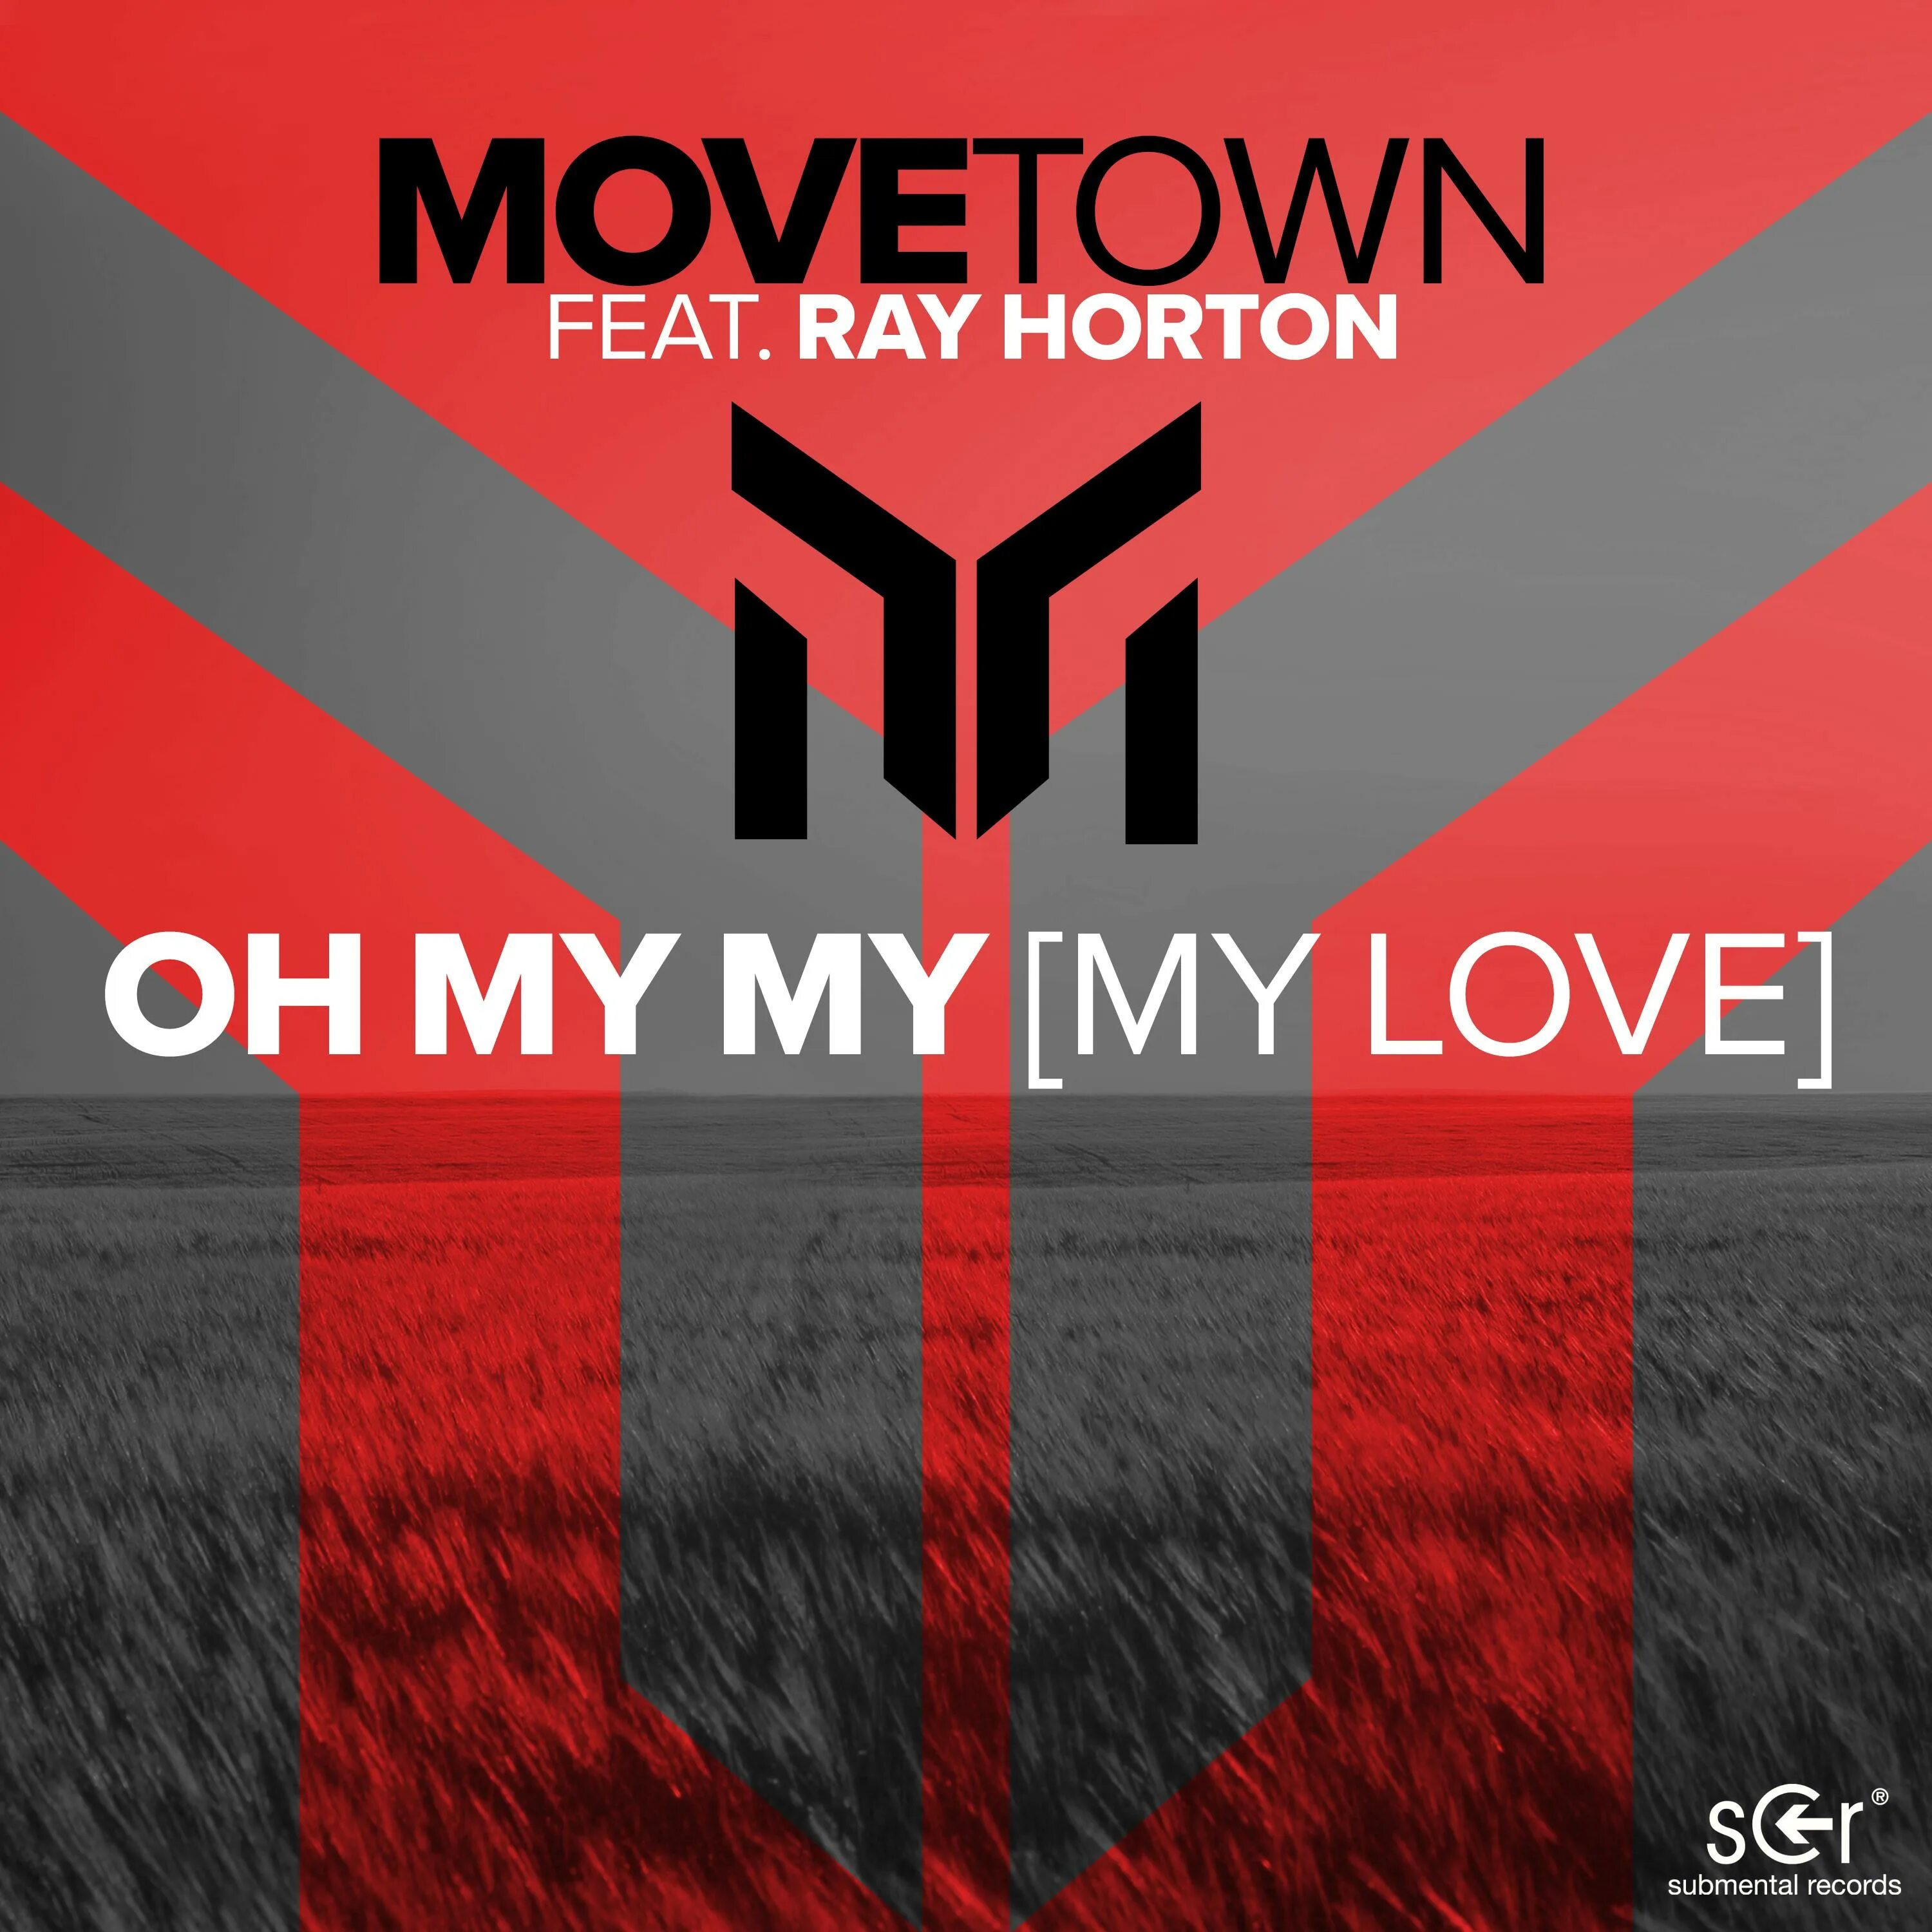 Ray Horton. Movetown feat. Ray Horton Fresh. Alok Sigala Ellie Goulding all by myself. Bass House 2023. Movetown feat horton